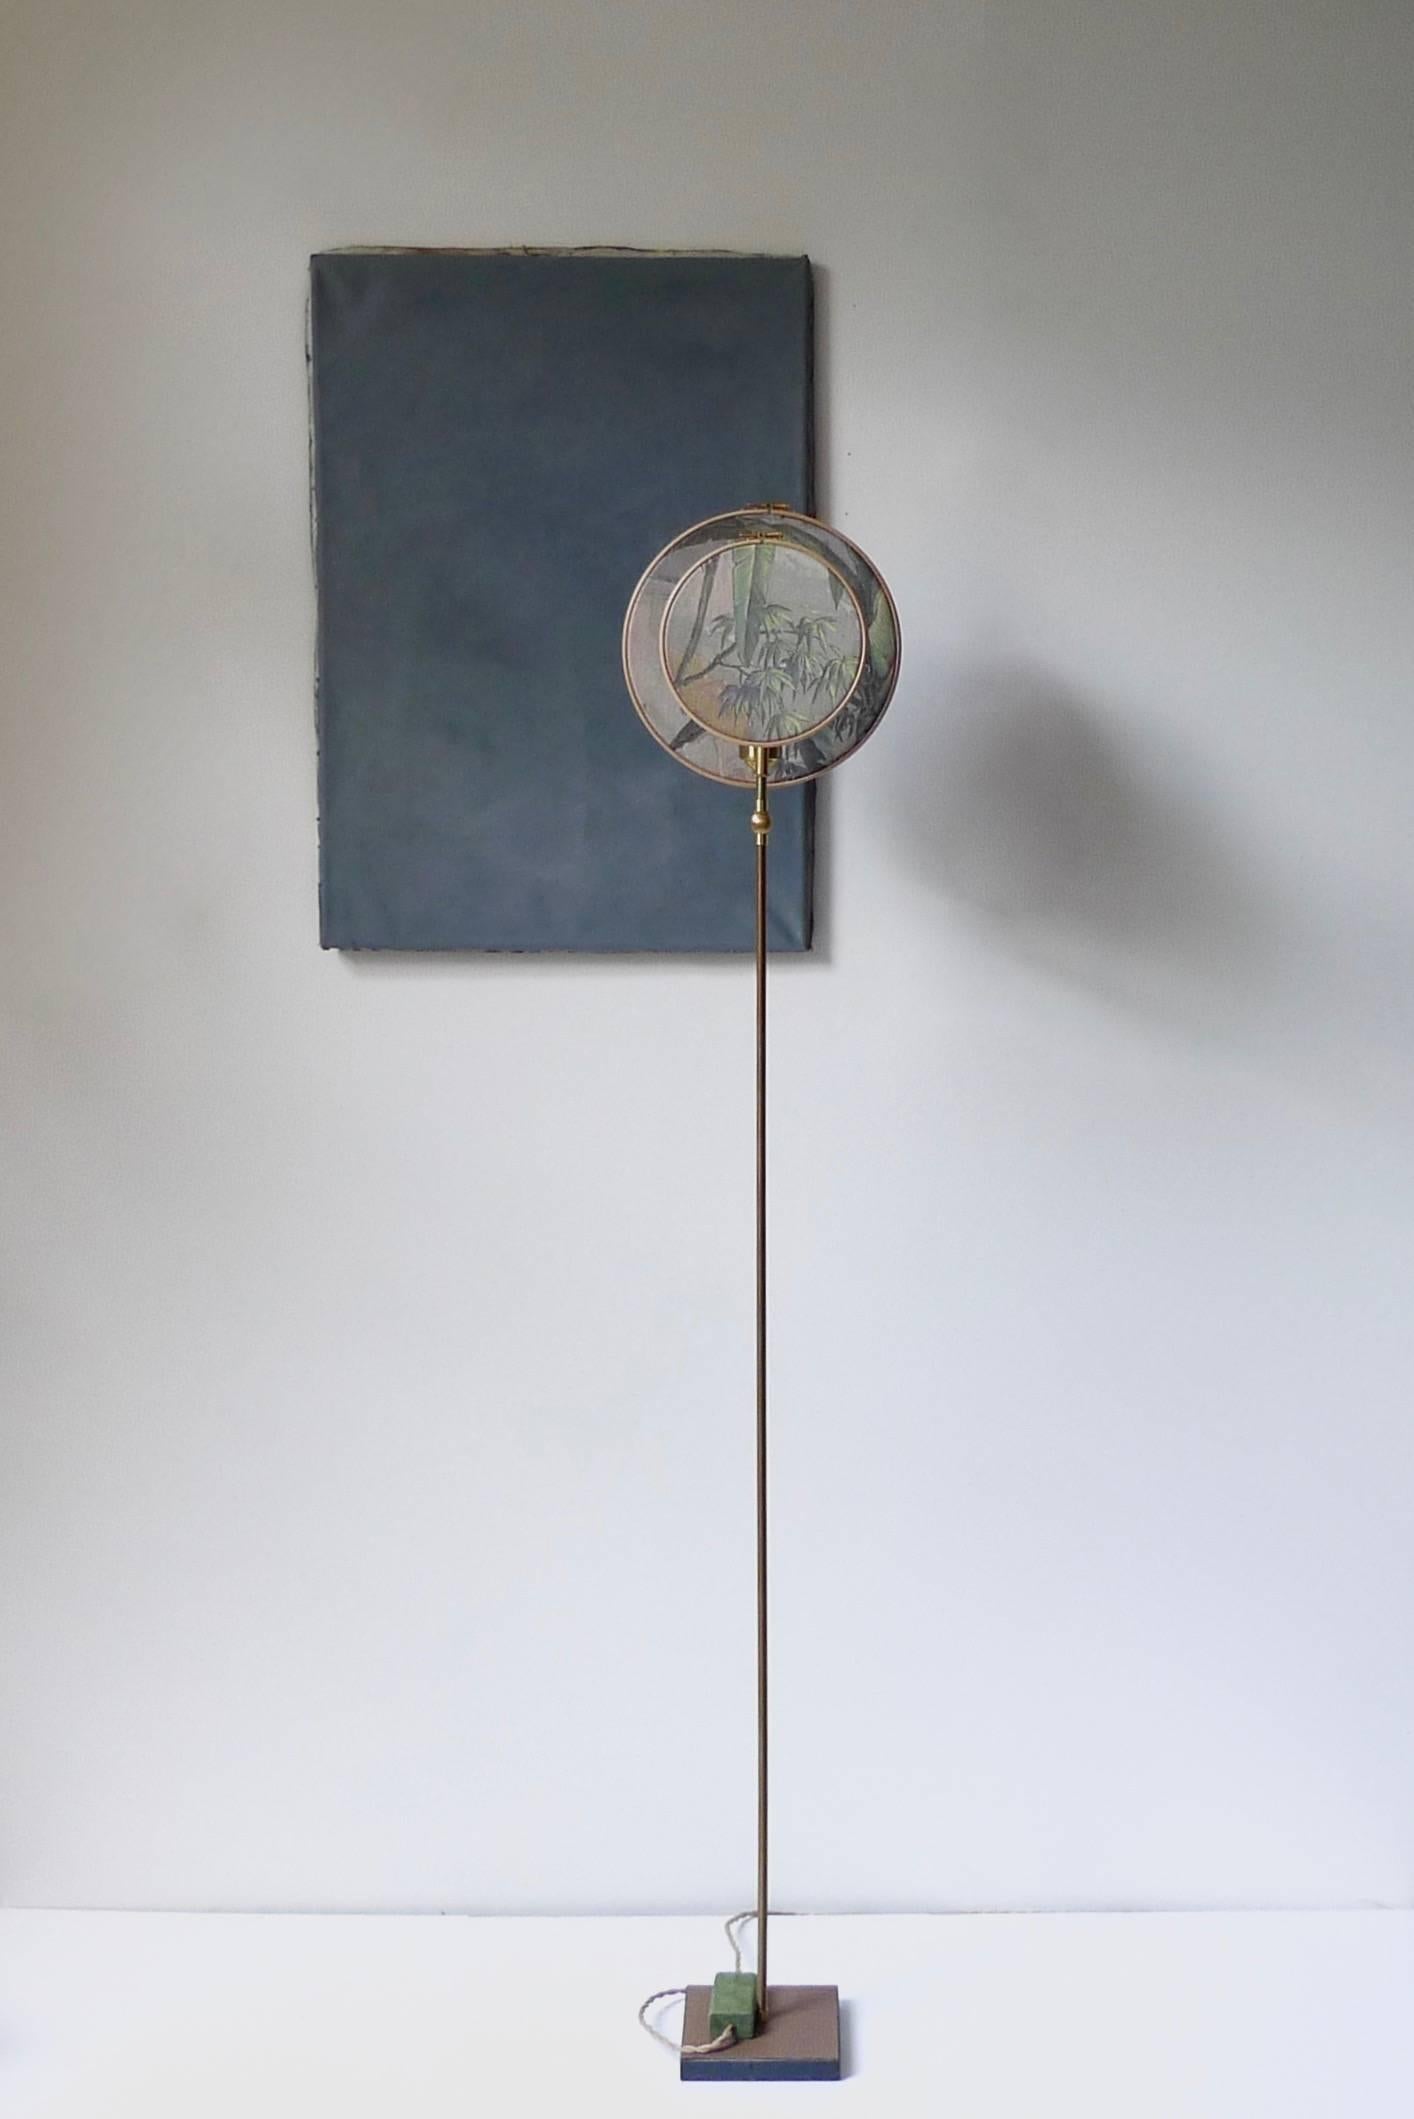 Light object, floor lamp, circle blue grey
Handmade in brass, leather, wood and hand printed and painted linen.
A dimmer is inlaid with leather.
Dimensions: H 146 x W 27 x D 16 cm.
The design artwork is meticulously handcrafted in a limited